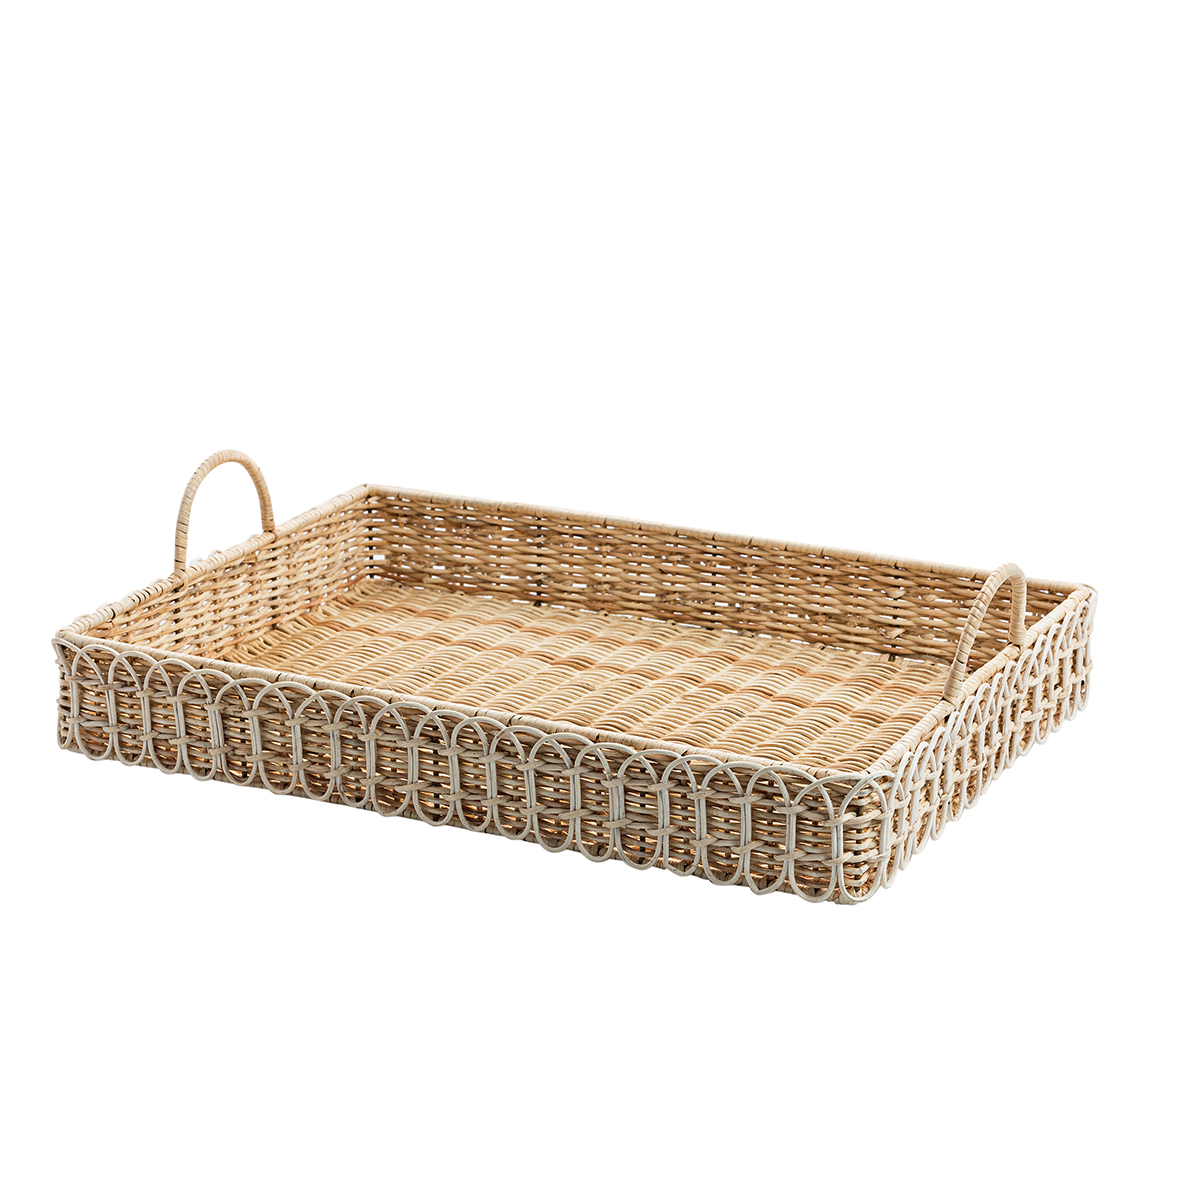 Rectangular handwoven Provence rattan tray, light tan — available at Mt Pleasant home decor store GDC Home